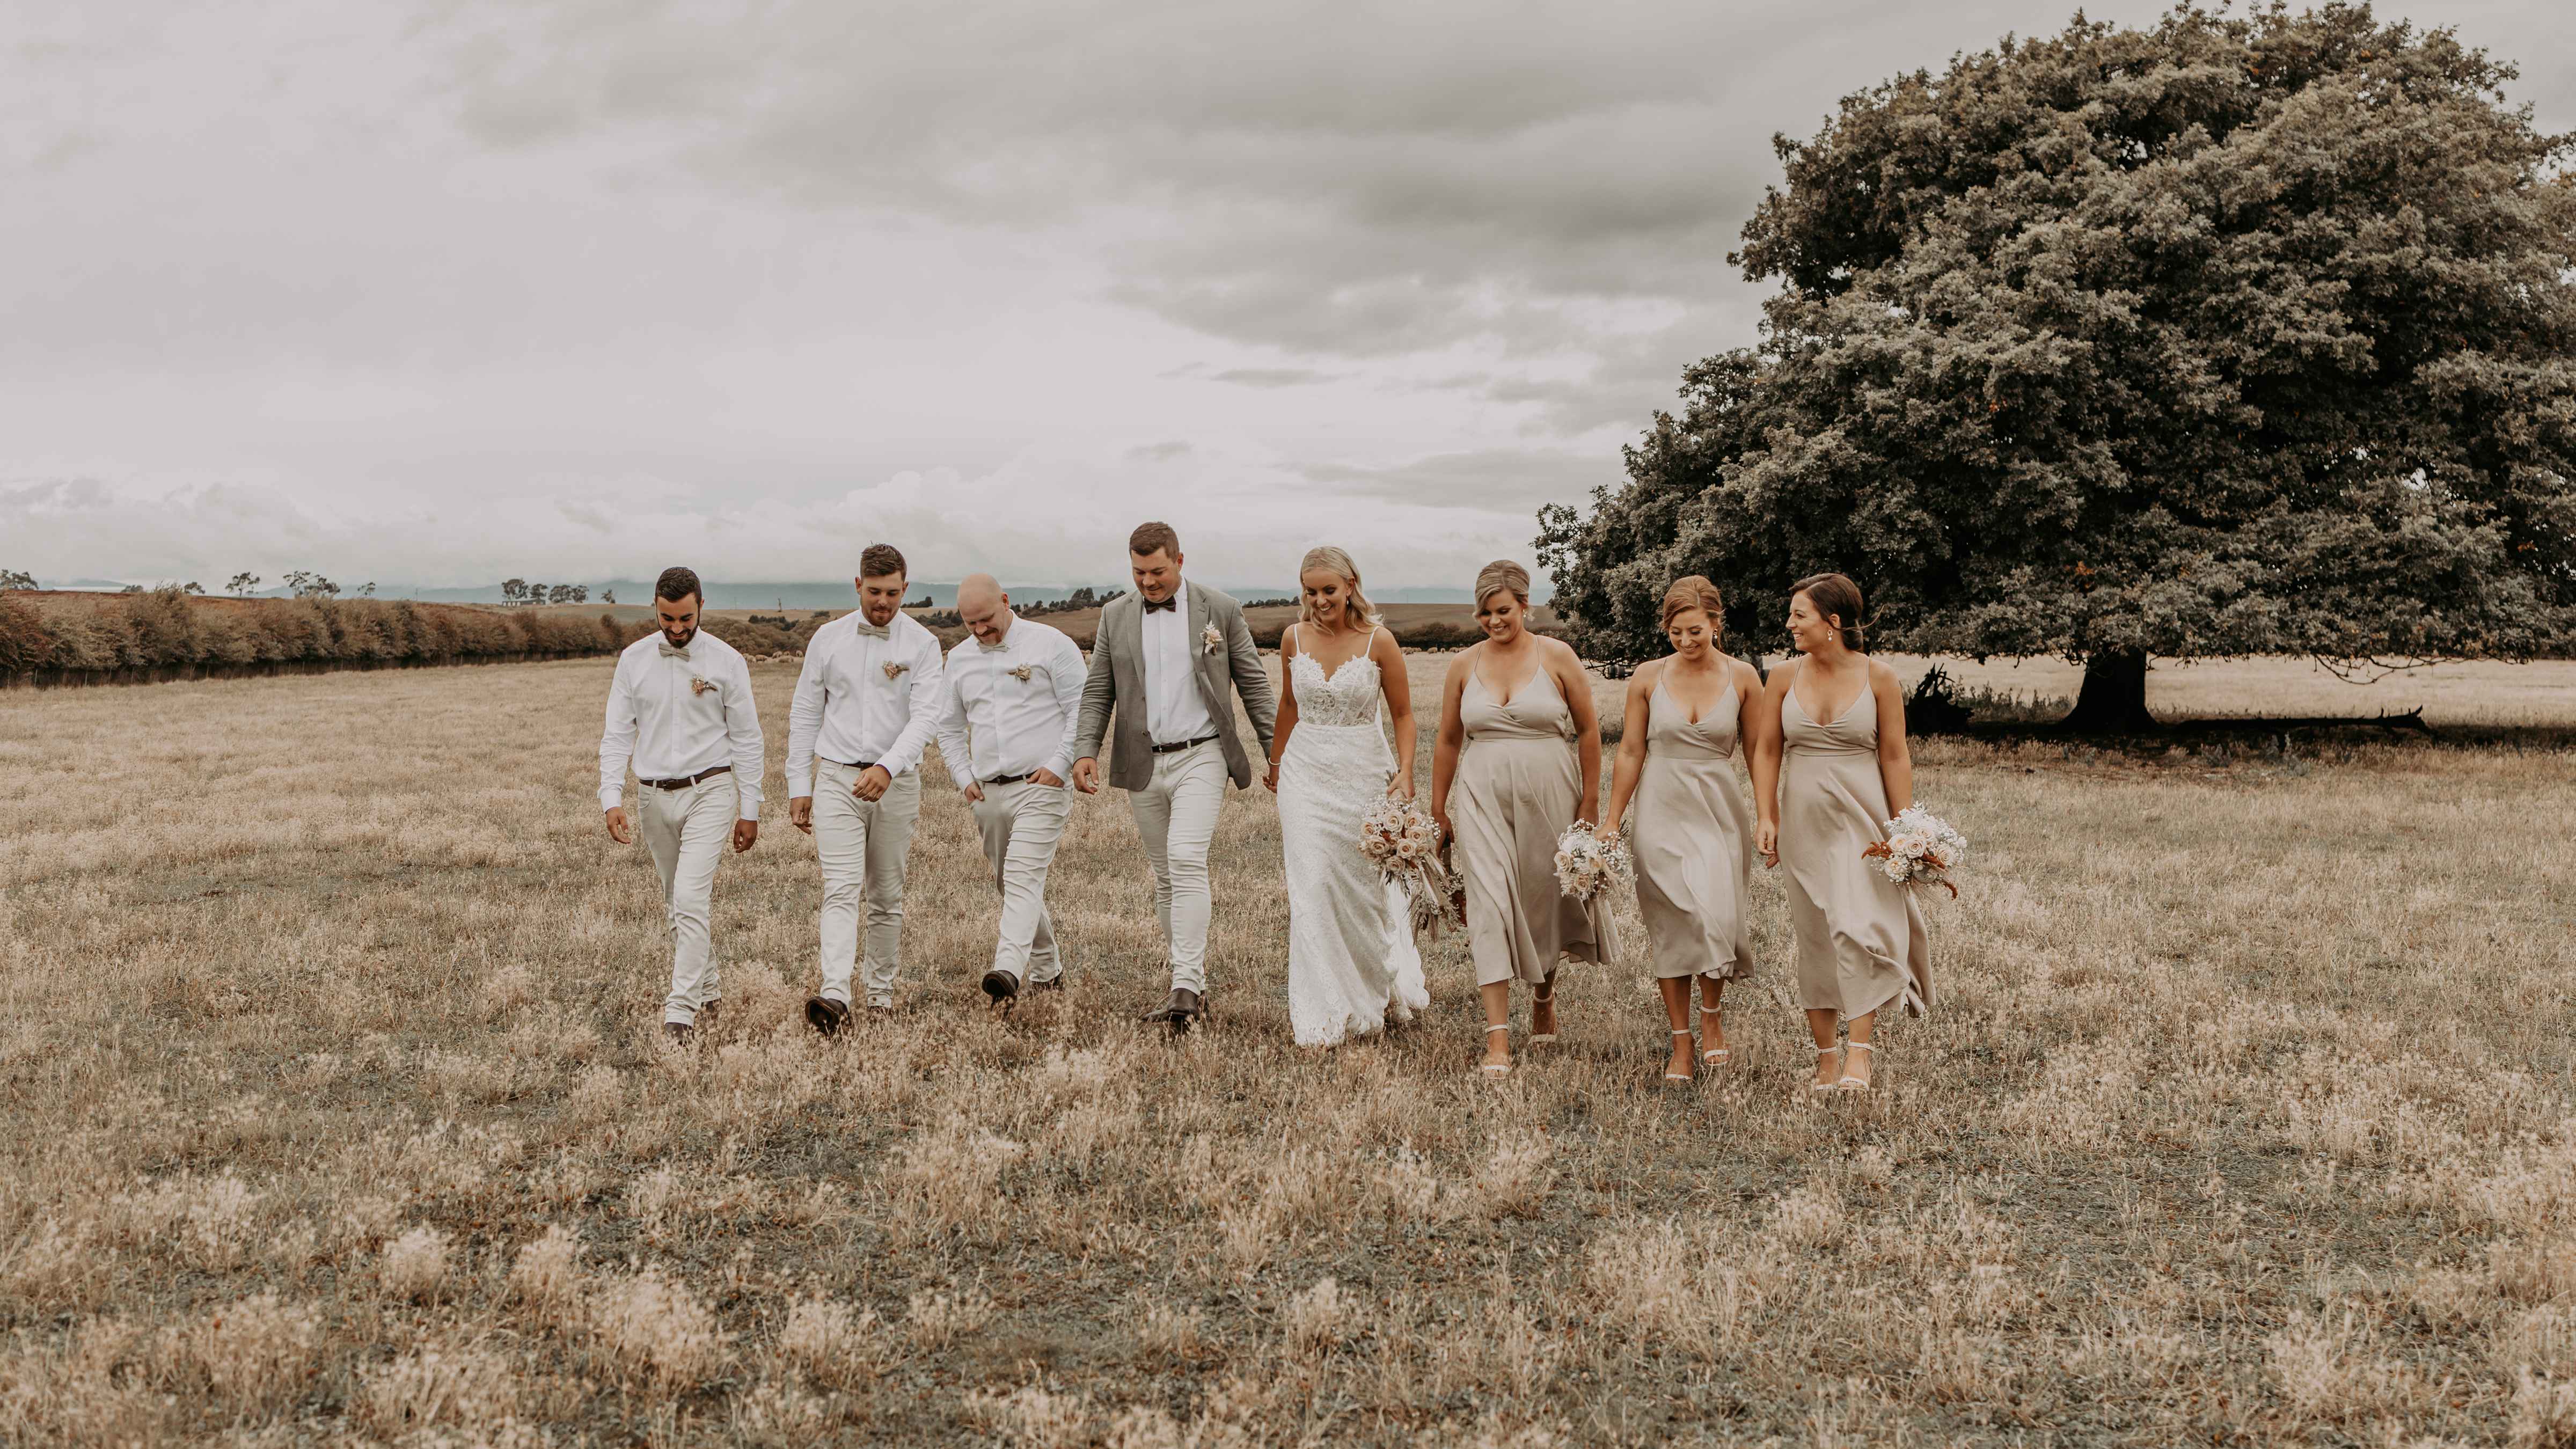 A bridal party of four men and four women walk through a paddock with a large oak tree in the background. The sky is overcast. Photo: Tiarne Shaw Photography.